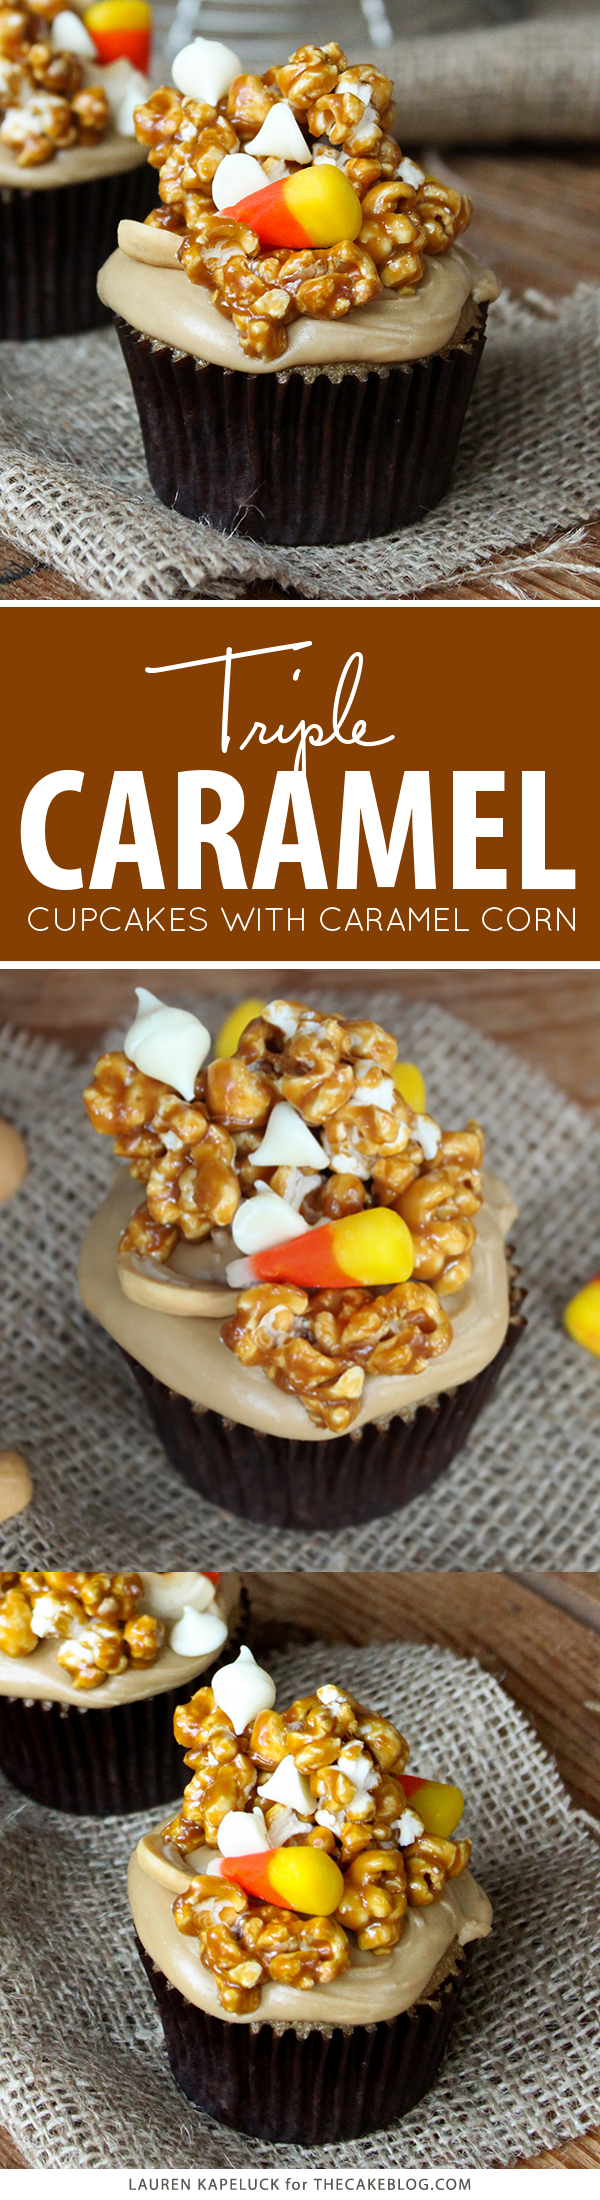 Caramel Corn Cupcakes for Halloween - caramel cupcakes topped with caramel frosting and caramel popcorn studded with candy corn and cashews | by Lauren Kapeluck for TheCakeBlog.com